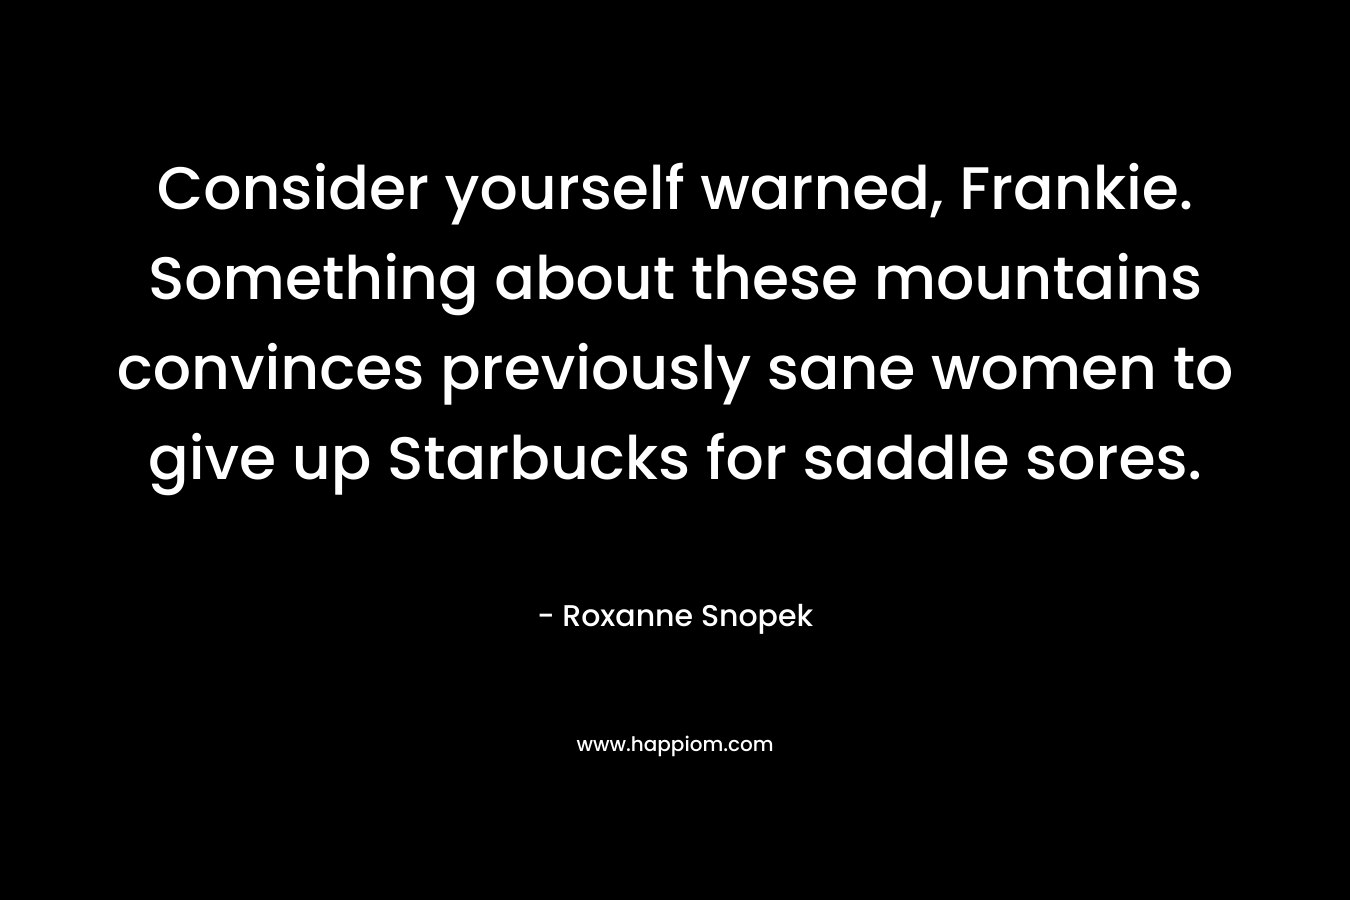 Consider yourself warned, Frankie. Something about these mountains convinces previously sane women to give up Starbucks for saddle sores. – Roxanne Snopek